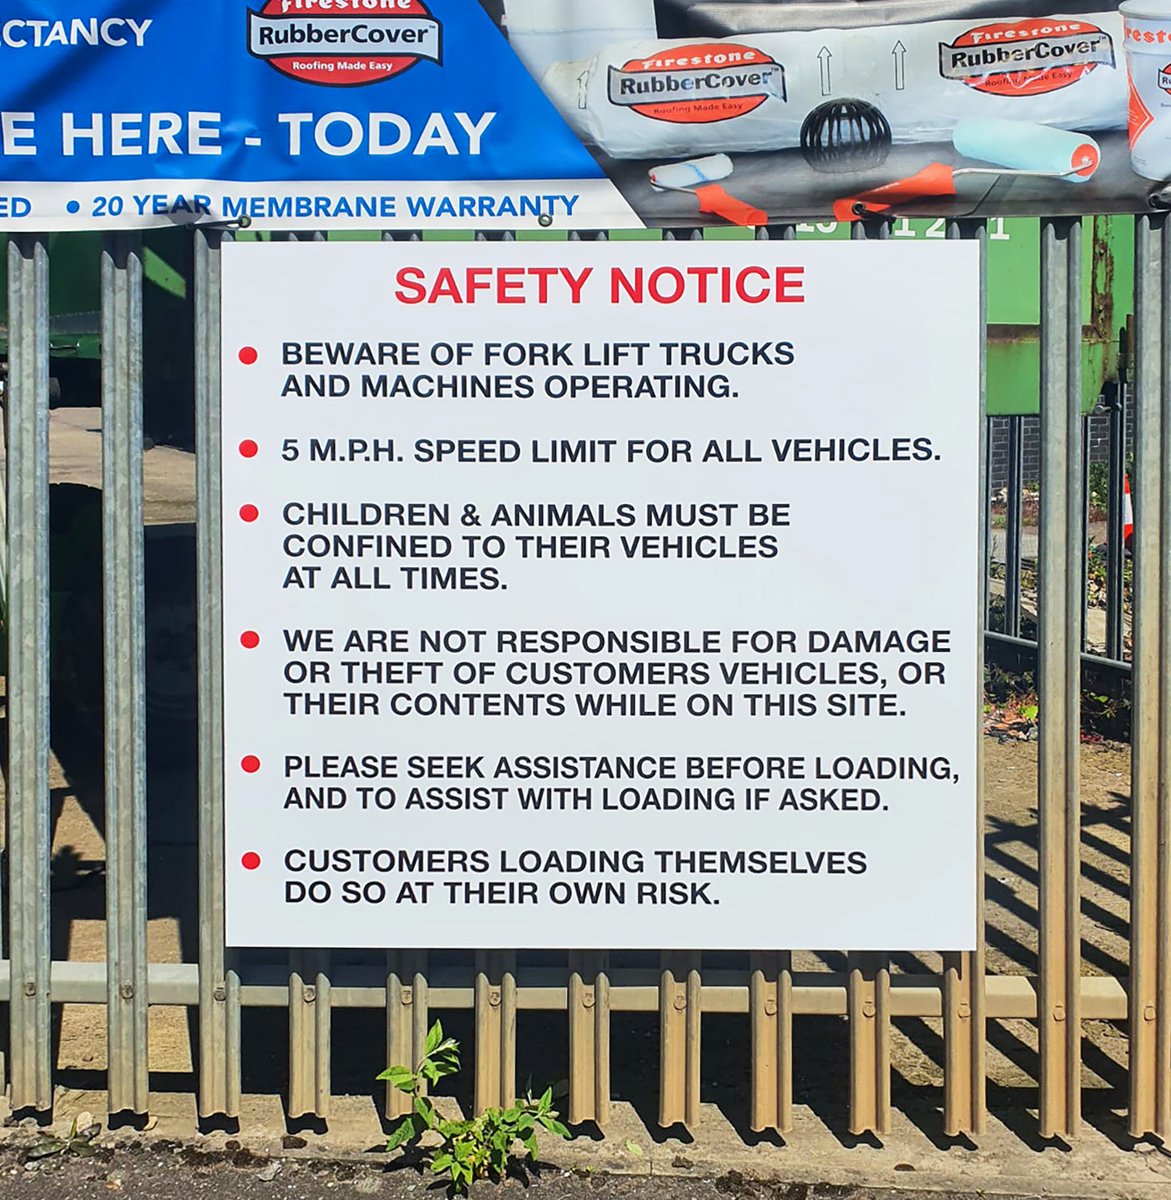 Custom Dibond safety/hazard signage. We can design, print and install any signage for you. Call us on 0115 961 6060 for more info. #signageinstallation #signagesupplier #signageprintandinstallation #signagesolutions